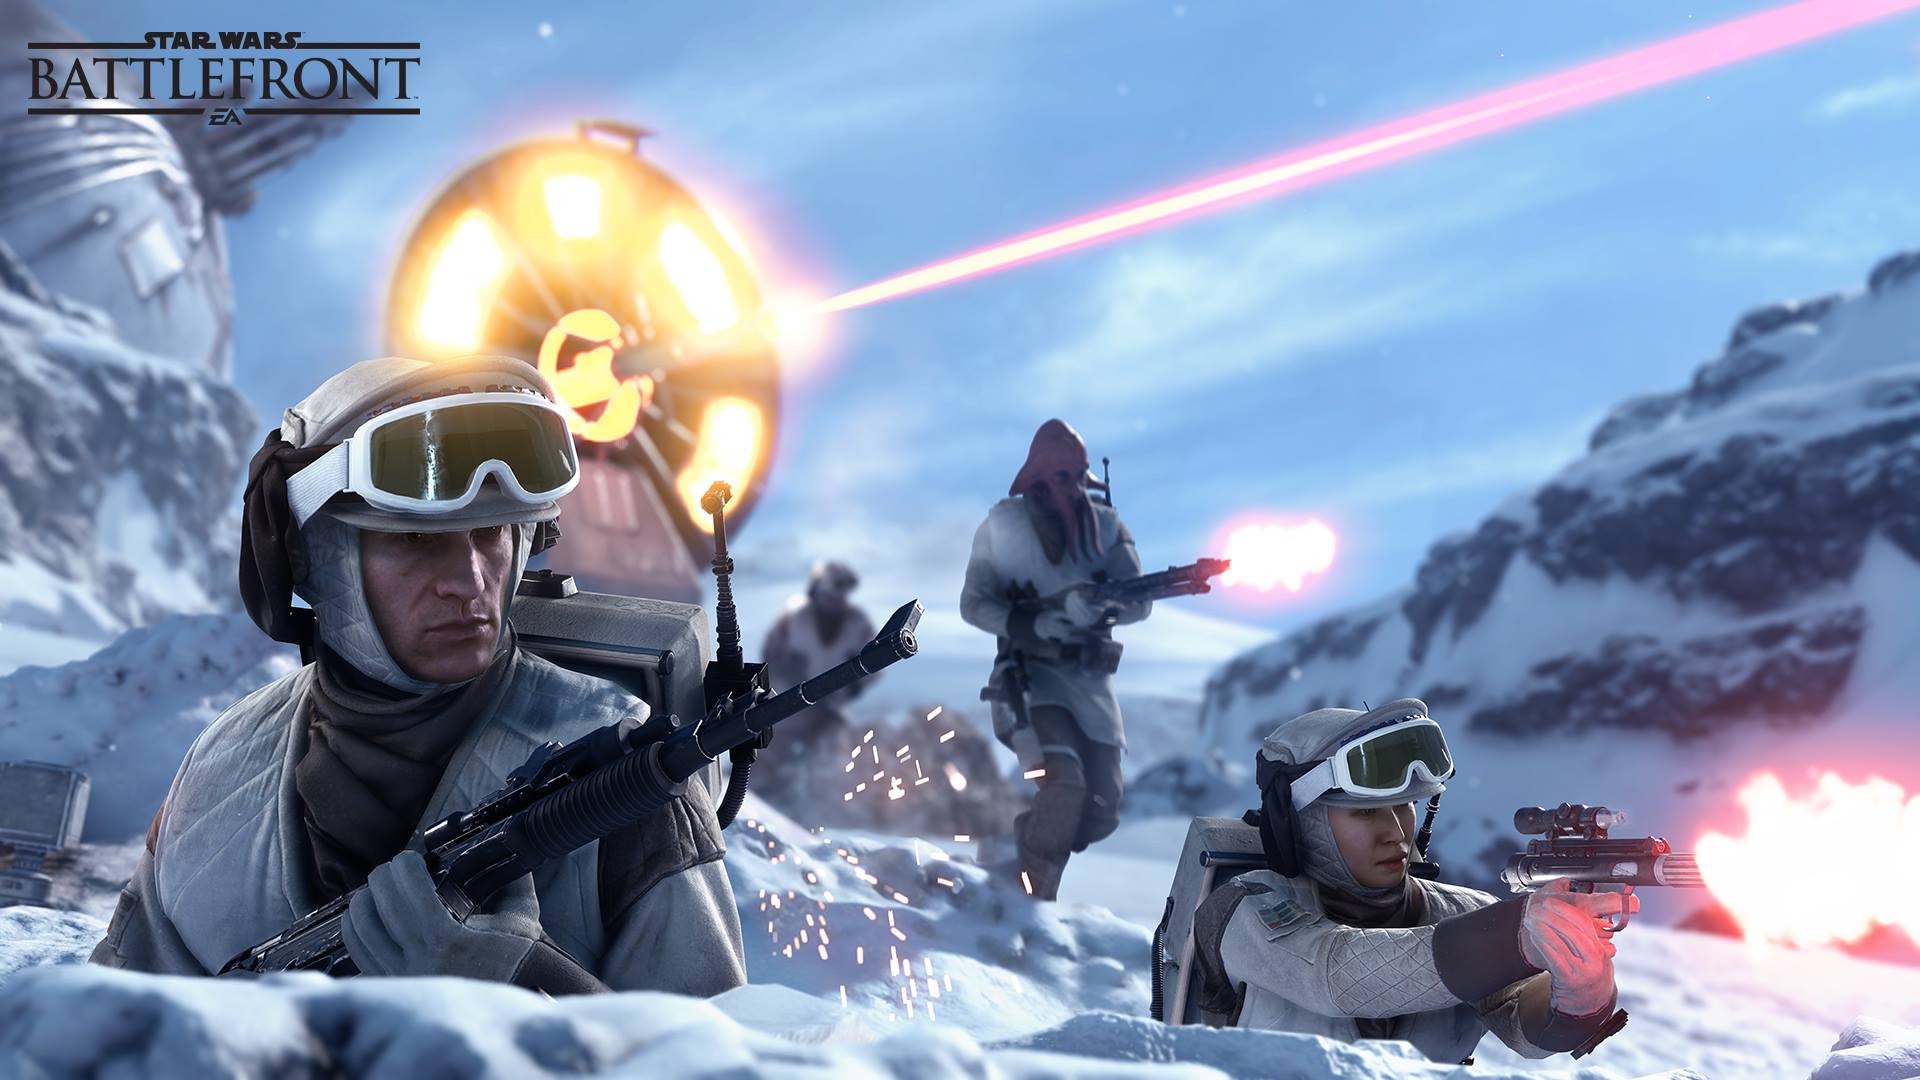 General 1920x1080 Star Wars: Battlefront Star Wars Rebel Alliance Hoth Battle of Hoth A280 blaster rifle DH-17 blaster pistol video games blaster video game art PC gaming Electronic Arts EA DICE